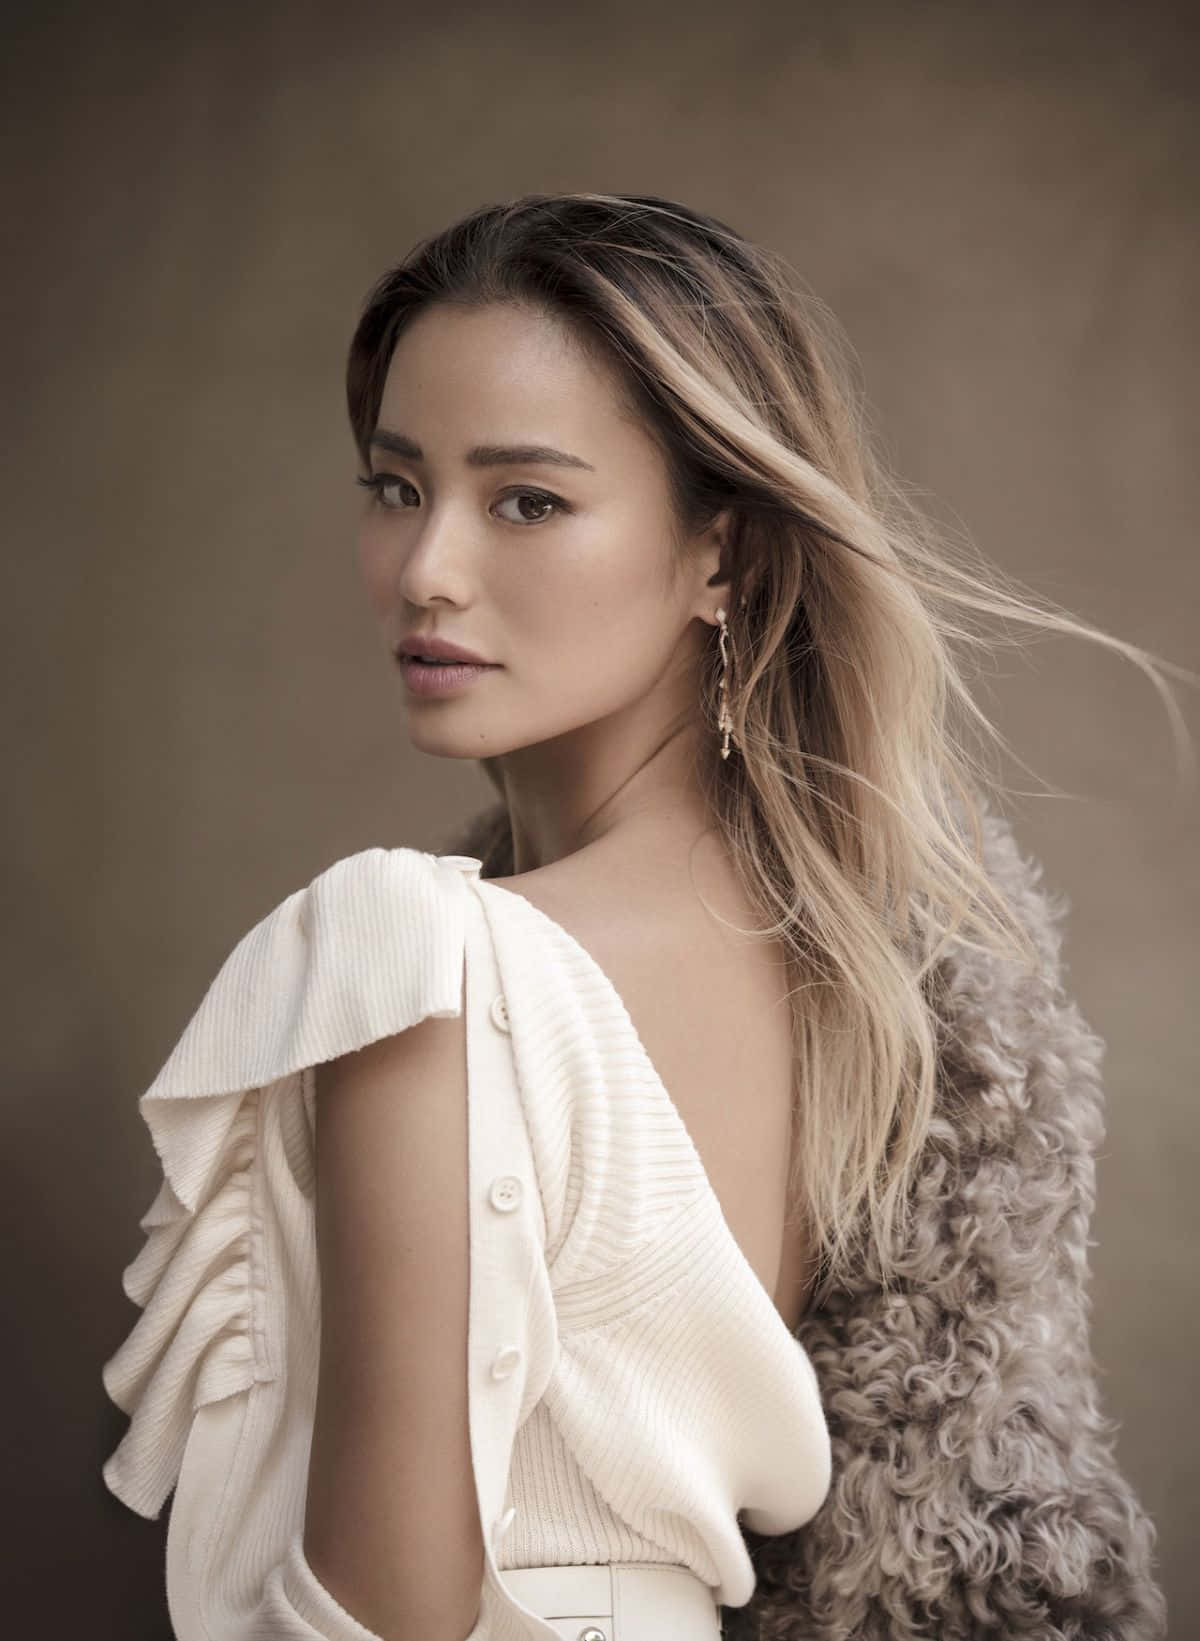 Jamie Chung posing gracefully in a stylish outfit Wallpaper